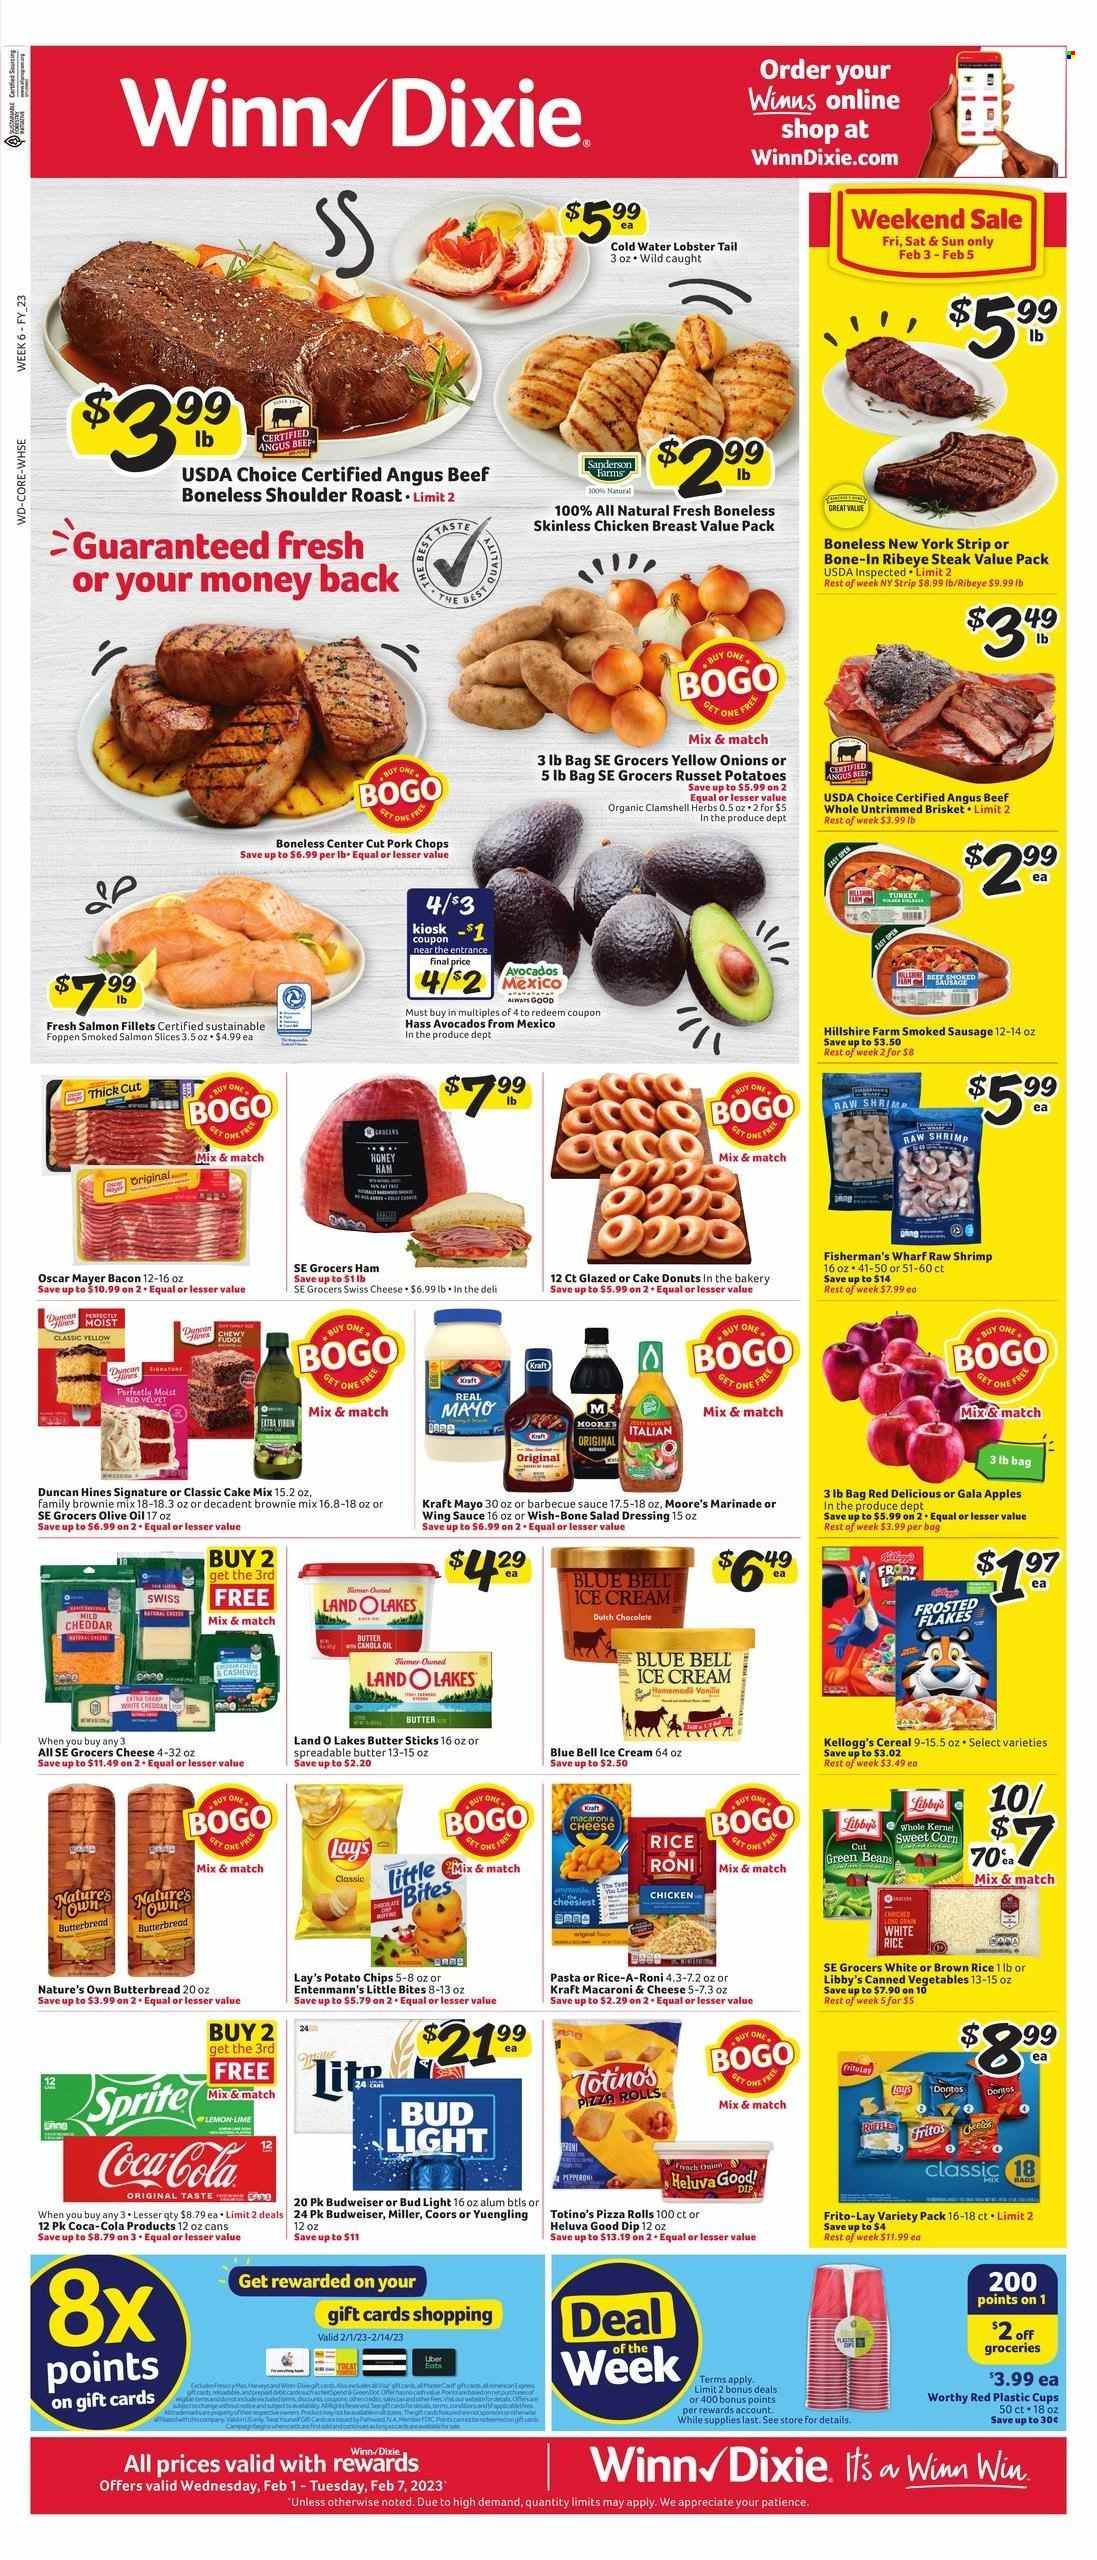 thumbnail - Winn Dixie Flyer - 02/01/2023 - 02/07/2023 - Sales products - pizza rolls, donut, Entenmann's, brownie mix, cake mix, beans, corn, green beans, russet potatoes, onion, sweet corn, apples, avocado, Gala, Red Delicious apples, lobster, salmon, salmon fillet, smoked salmon, lobster tail, shrimps, macaroni & cheese, pizza, sauce, Kraft®, bacon, ham, Hillshire Farm, Oscar Mayer, sausage, smoked sausage, swiss cheese, spreadable butter, mayonnaise, dip, ice cream, Blue Bell, Kellogg's, Little Bites, Fritos, potato chips, chips, Lay’s, Frito-Lay, canned vegetables, cereals, Frosted Flakes, brown rice, rice, white rice, BBQ sauce, salad dressing, dressing, marinade, wing sauce, canola oil, extra virgin olive oil, olive oil, oil, cashews, Coca-Cola, Sprite, beer, Bud Light, Miller, chicken breasts, beef meat, beef steak, steak, bone-in ribeye, ribeye steak, beef brisket, pork chops, pork meat, cup, Nature's Own, Budweiser, Coors, Yuengling. Page 1.